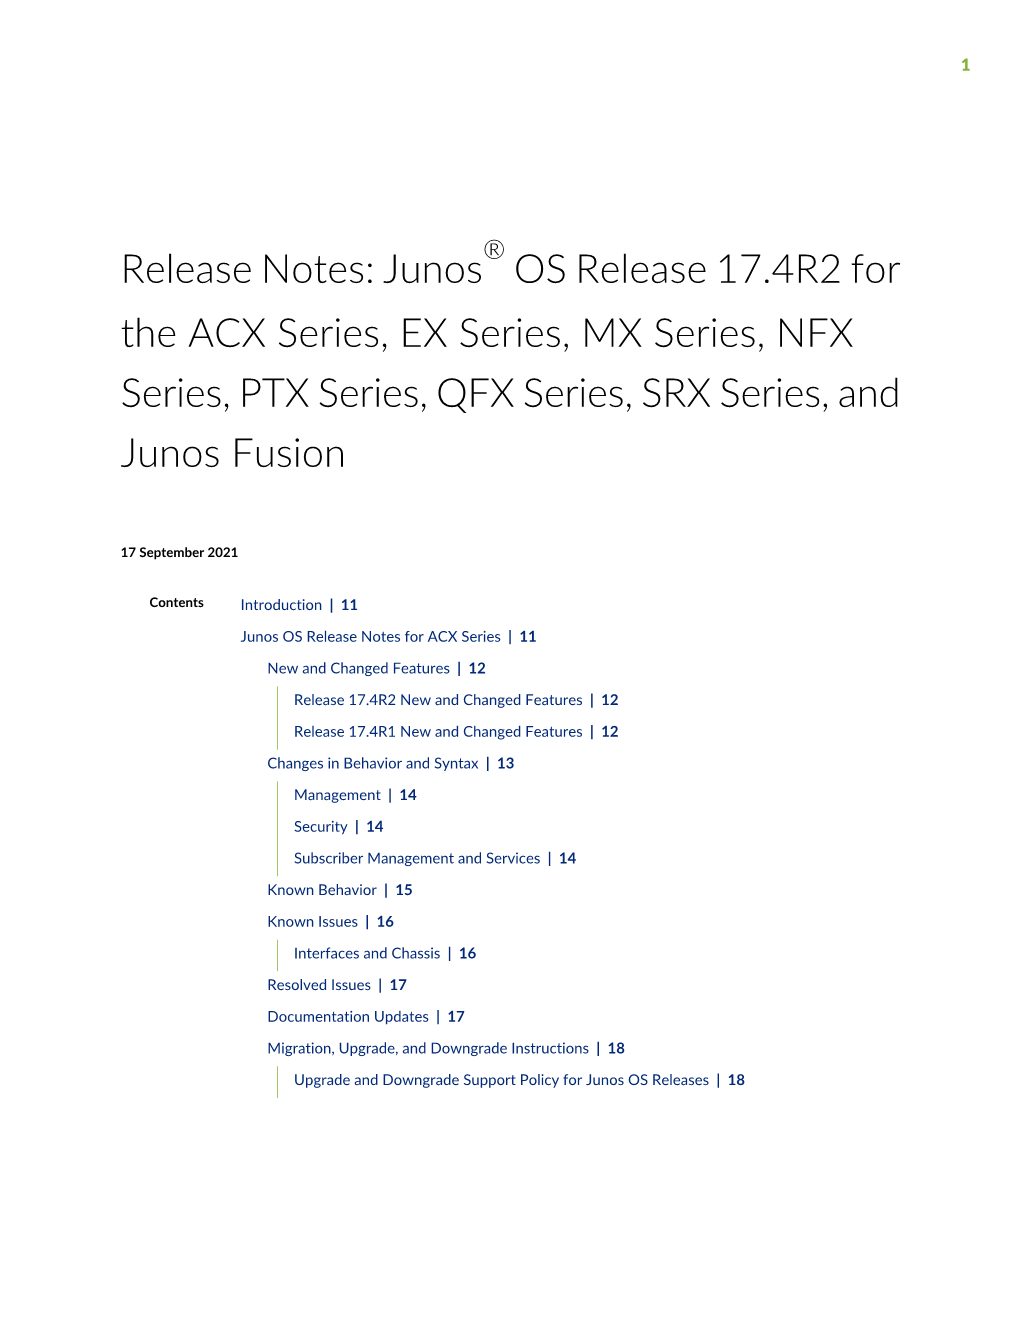 Release Notes: Junos® OS Release 17.4R2 for the ACX Series, EX Series, MX Series, NFX Series, PTX Series, QFX Series, SRX Series, and Junos Fusion